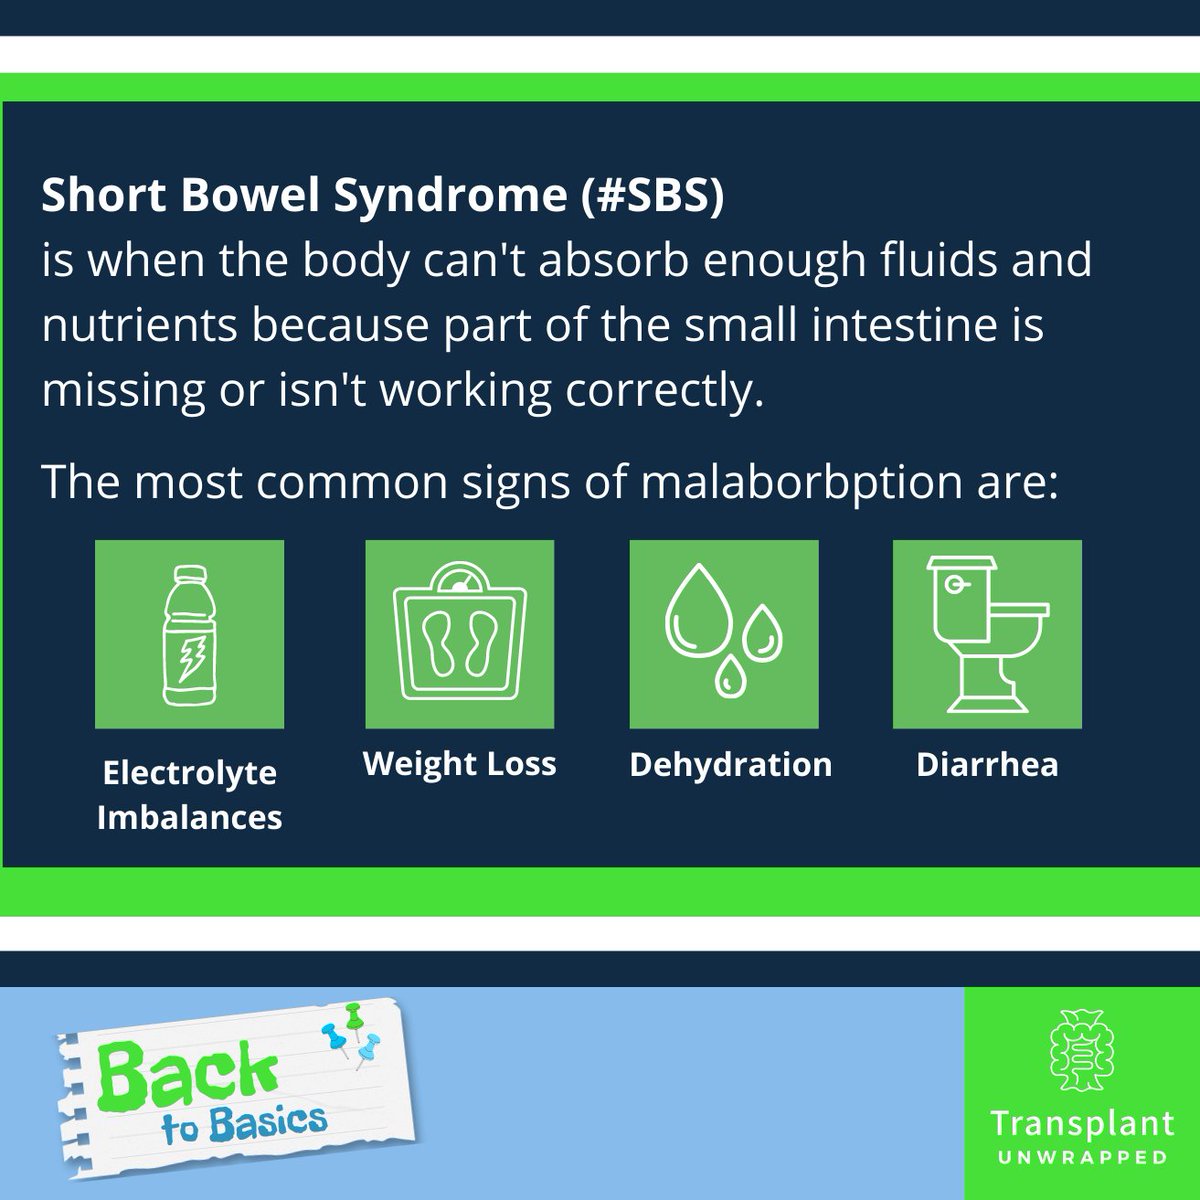 It is important to understand the basics of #ShortBowelSyndrome (#SBS) when you are diagnosed with this rare disorder. Learning the basic information allows you to know your body and become your best advocate.

#ThisIsSBS #SBSAwarenessMonth #txunwrapped